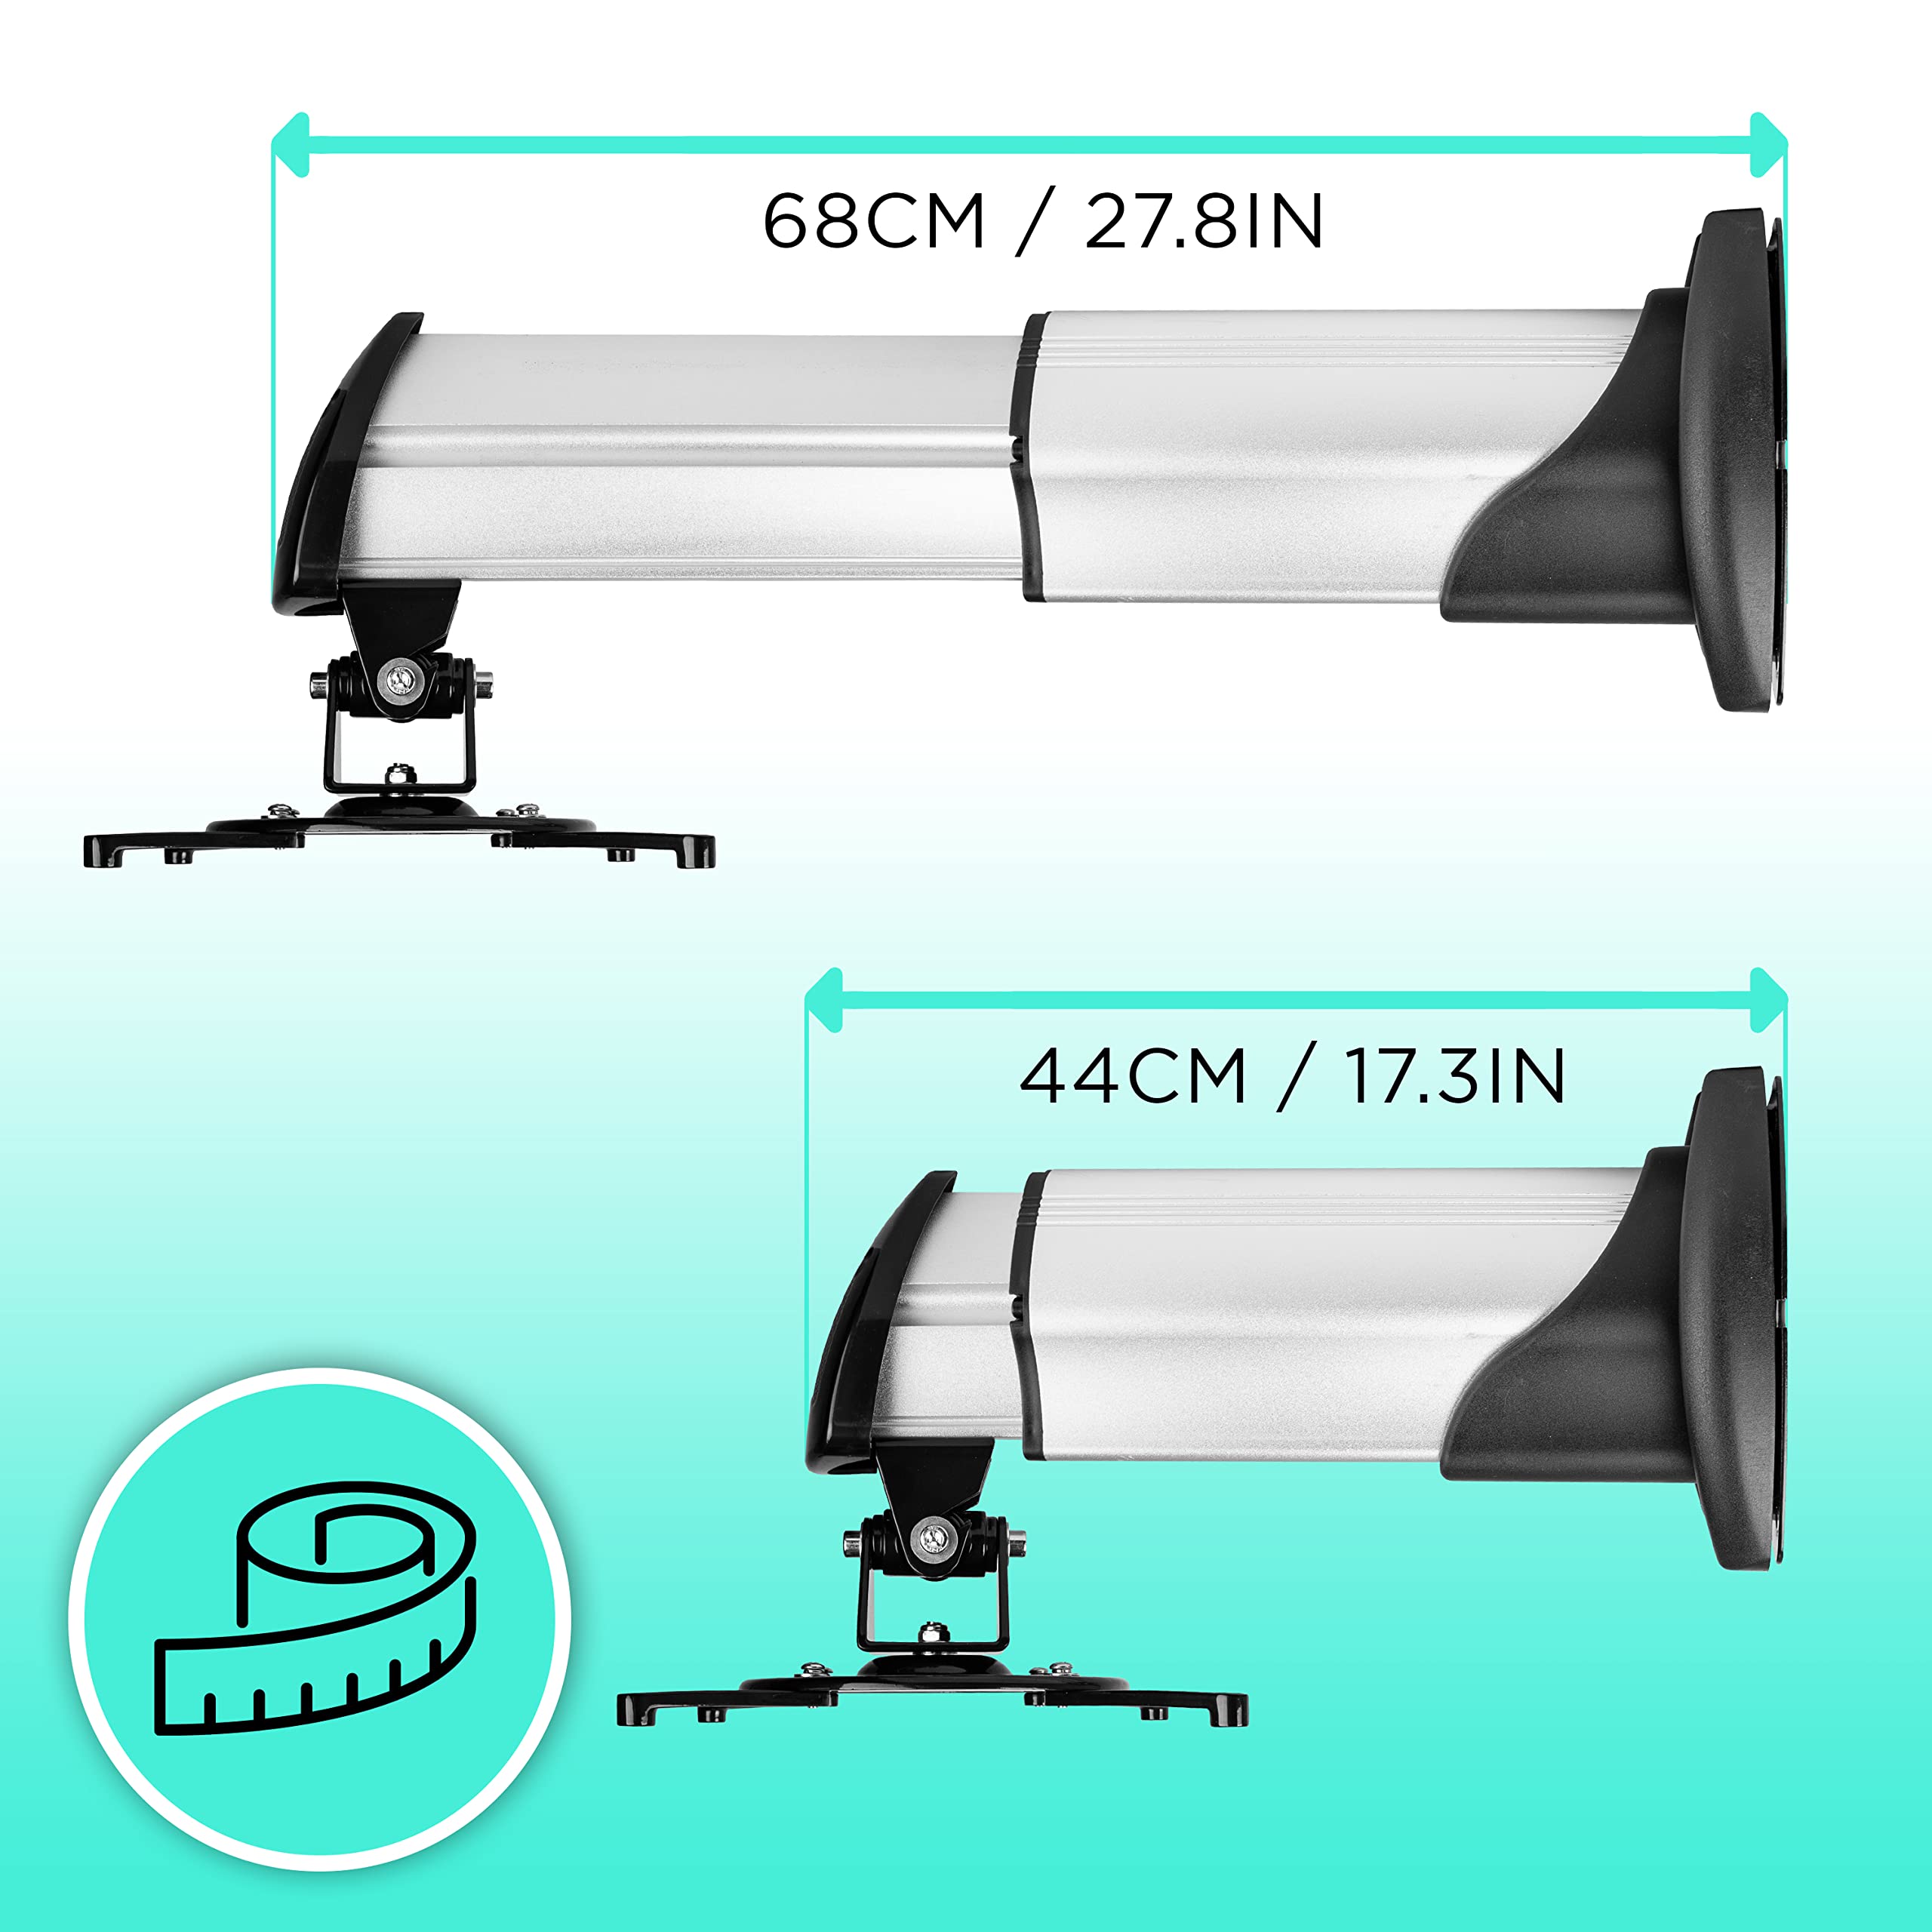 Duronic Projector Mount PB10XM (silver) | Extendable Telescopic Bracket Arm Fixing for Wall | 15kg Capacity | Universal | Heavy Duty | Fittings Included | Rotate 360 °, Swivel 180 °, Tilt 60°